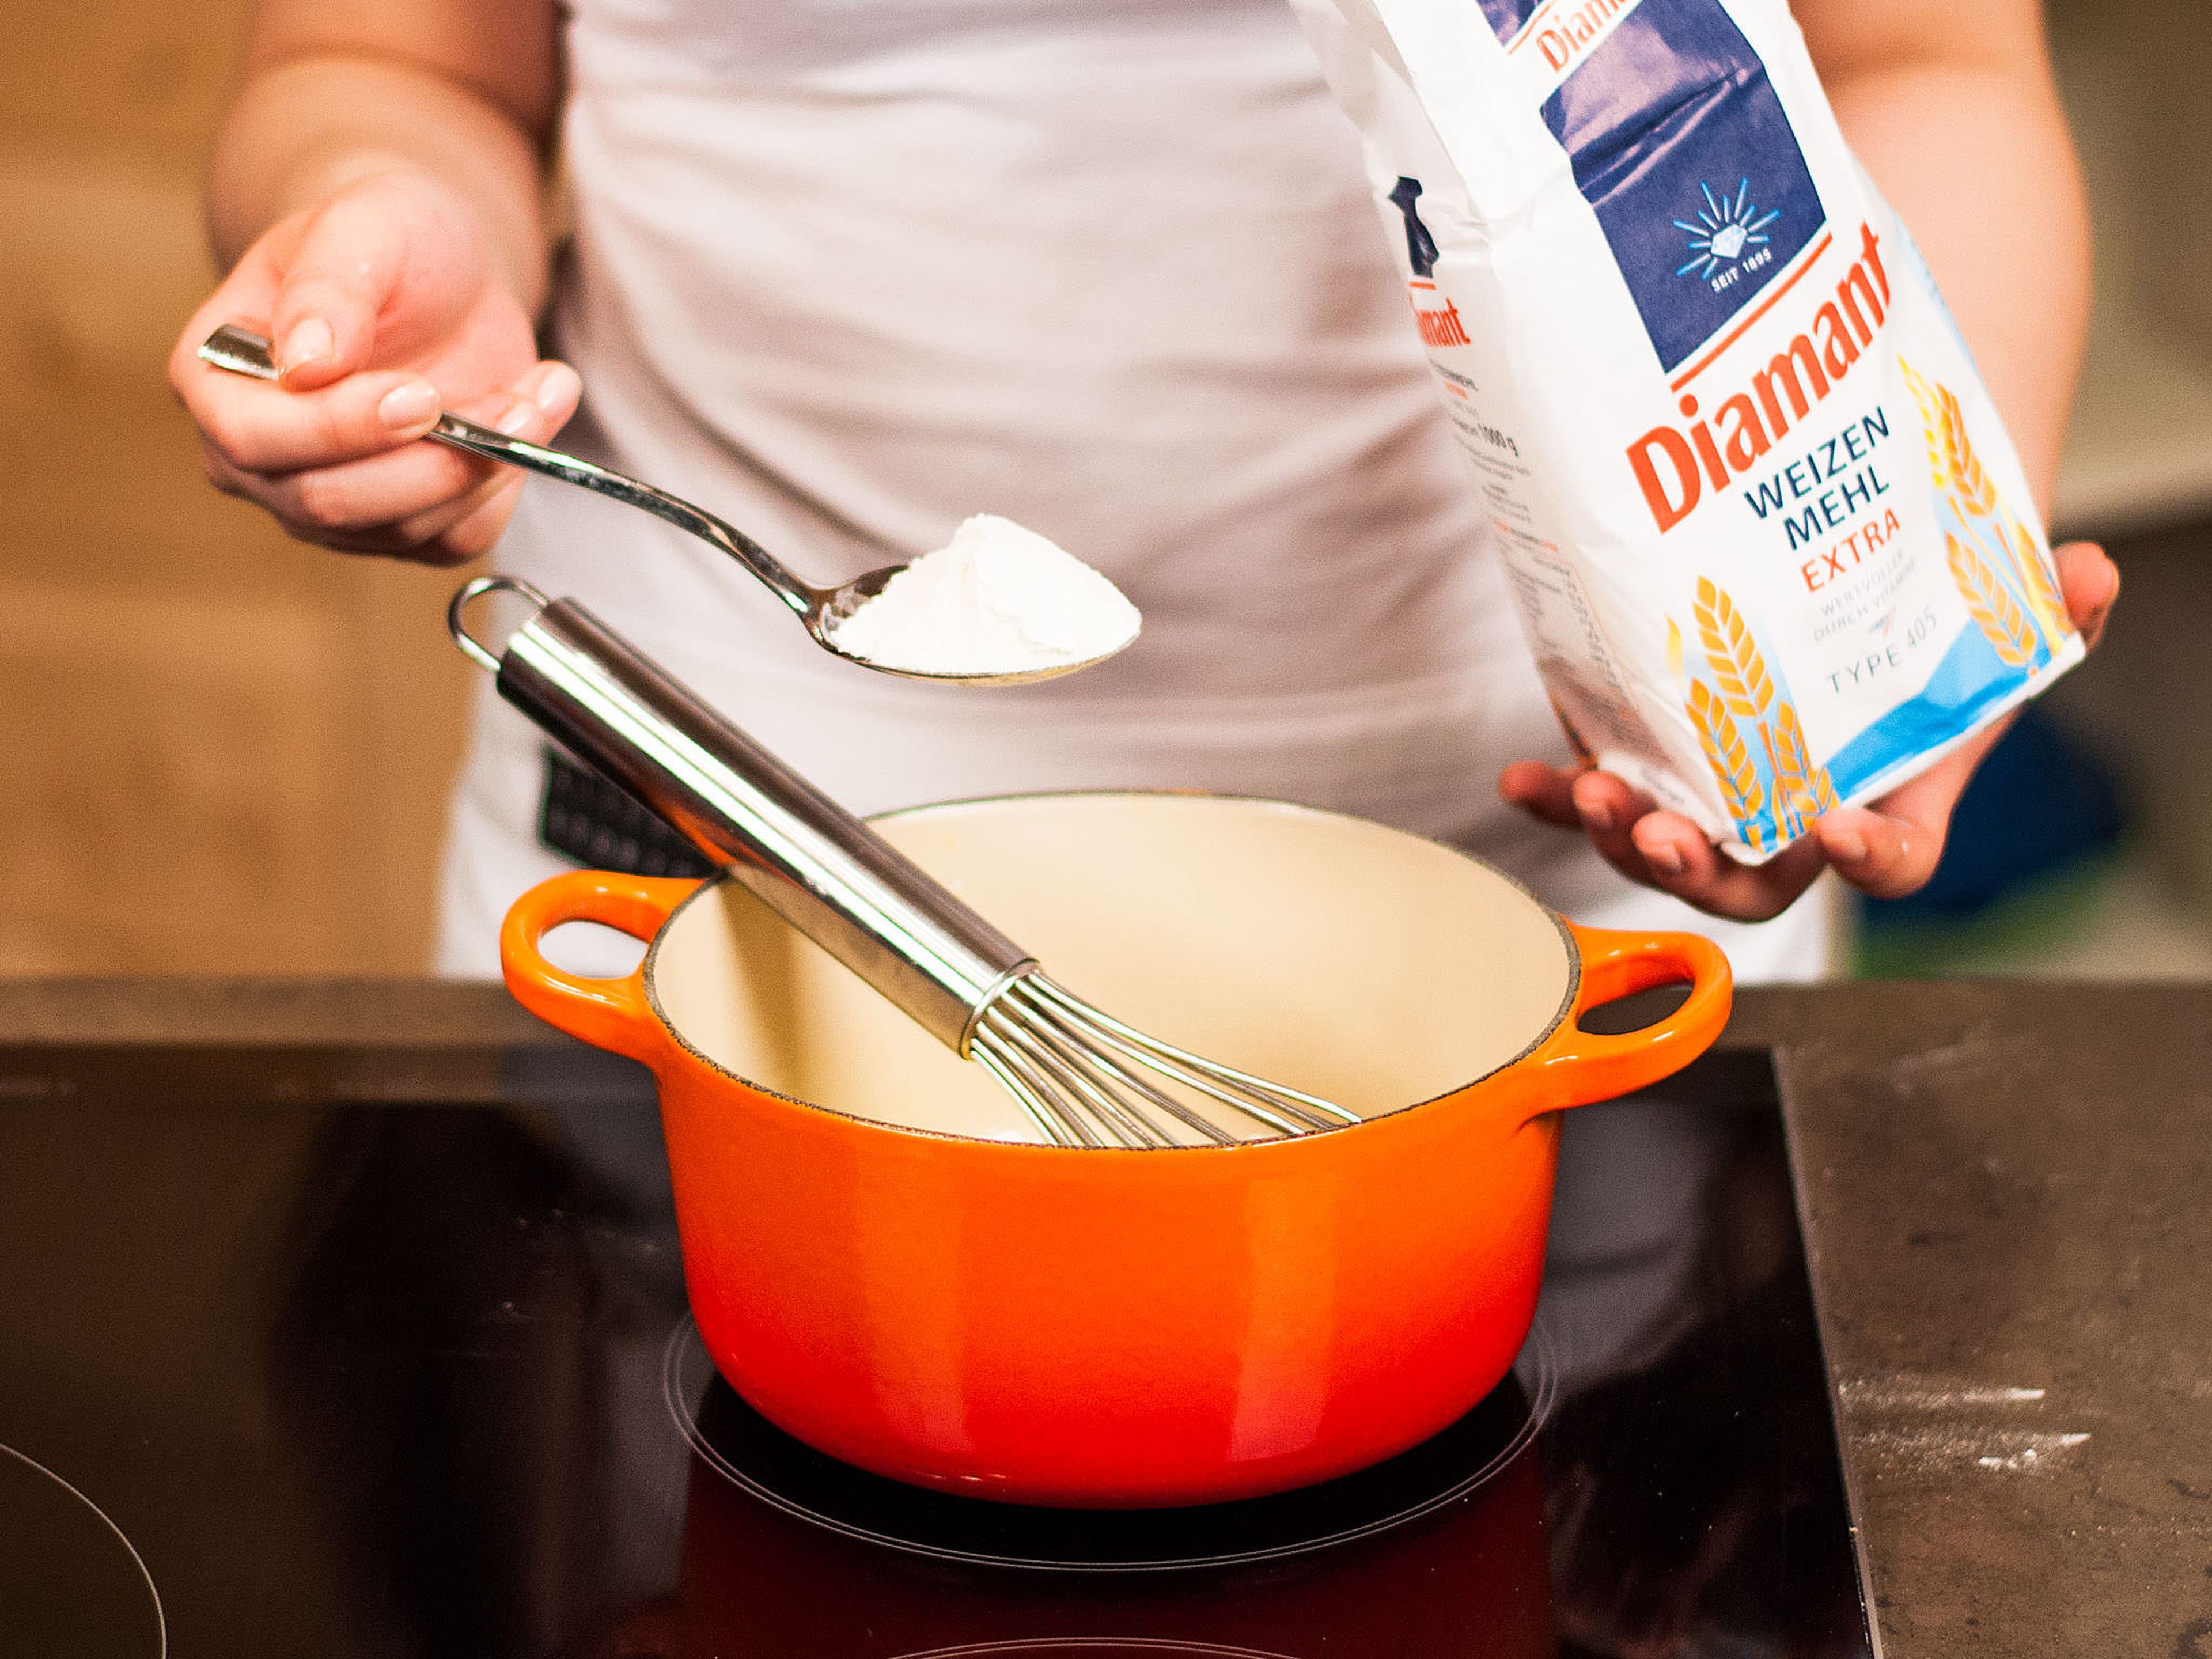 Prepare a roux for the cream sauce. Melt butter in a saucepan, add flour, and stir constantly until there are no more lumps.